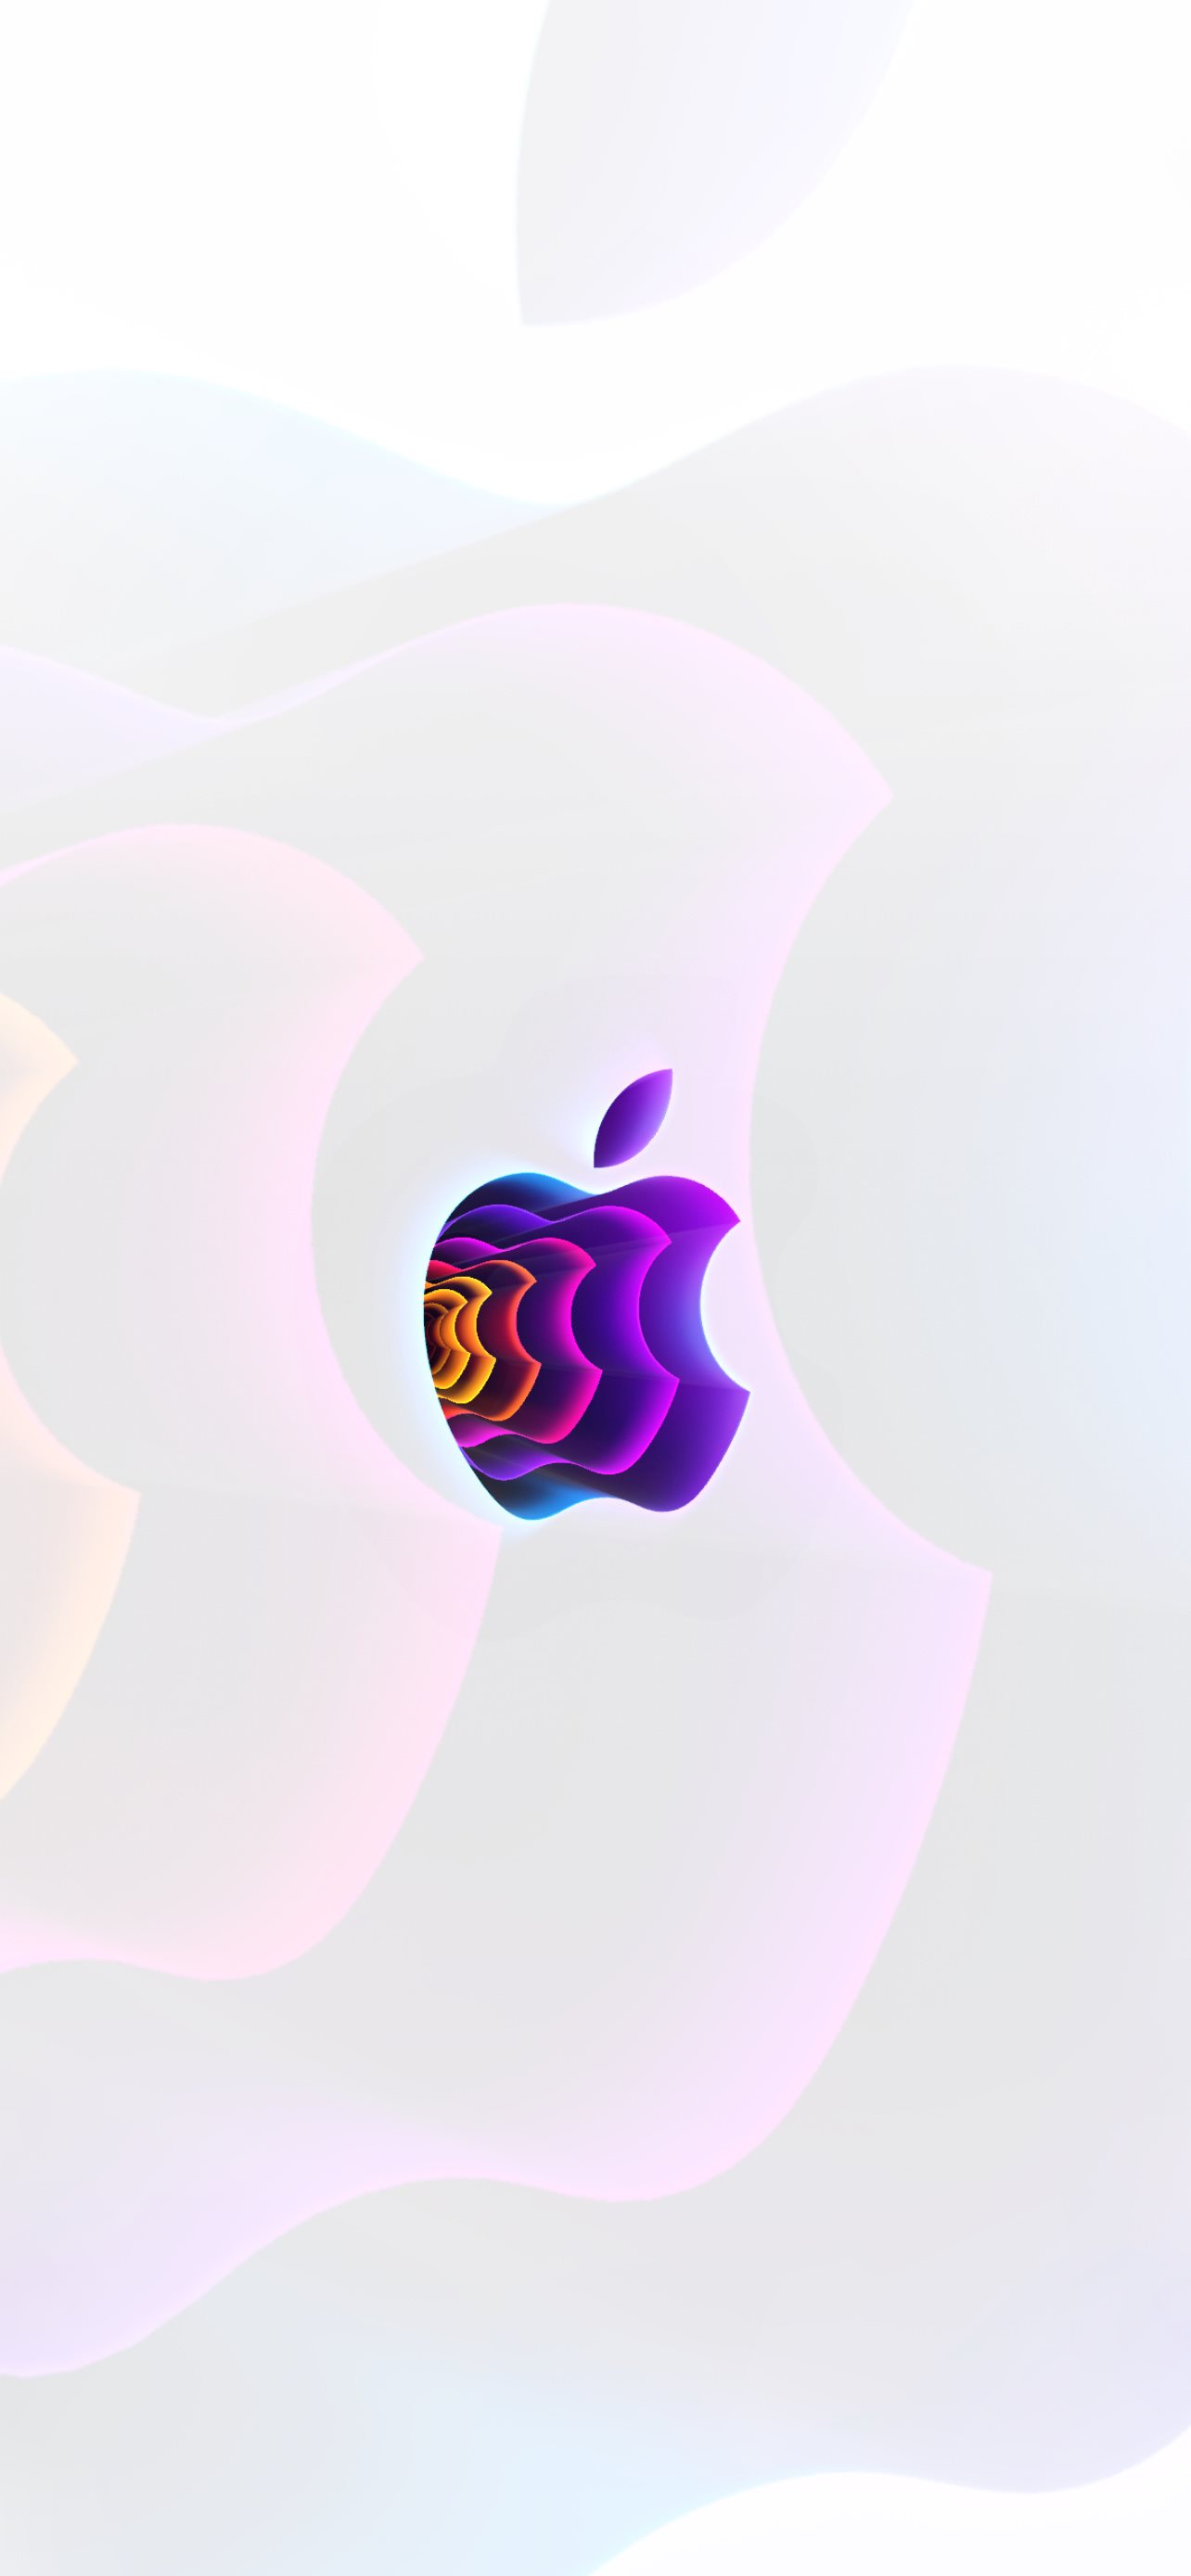 Apple Event March 2022 04 iPhone Wallpaper Free Download